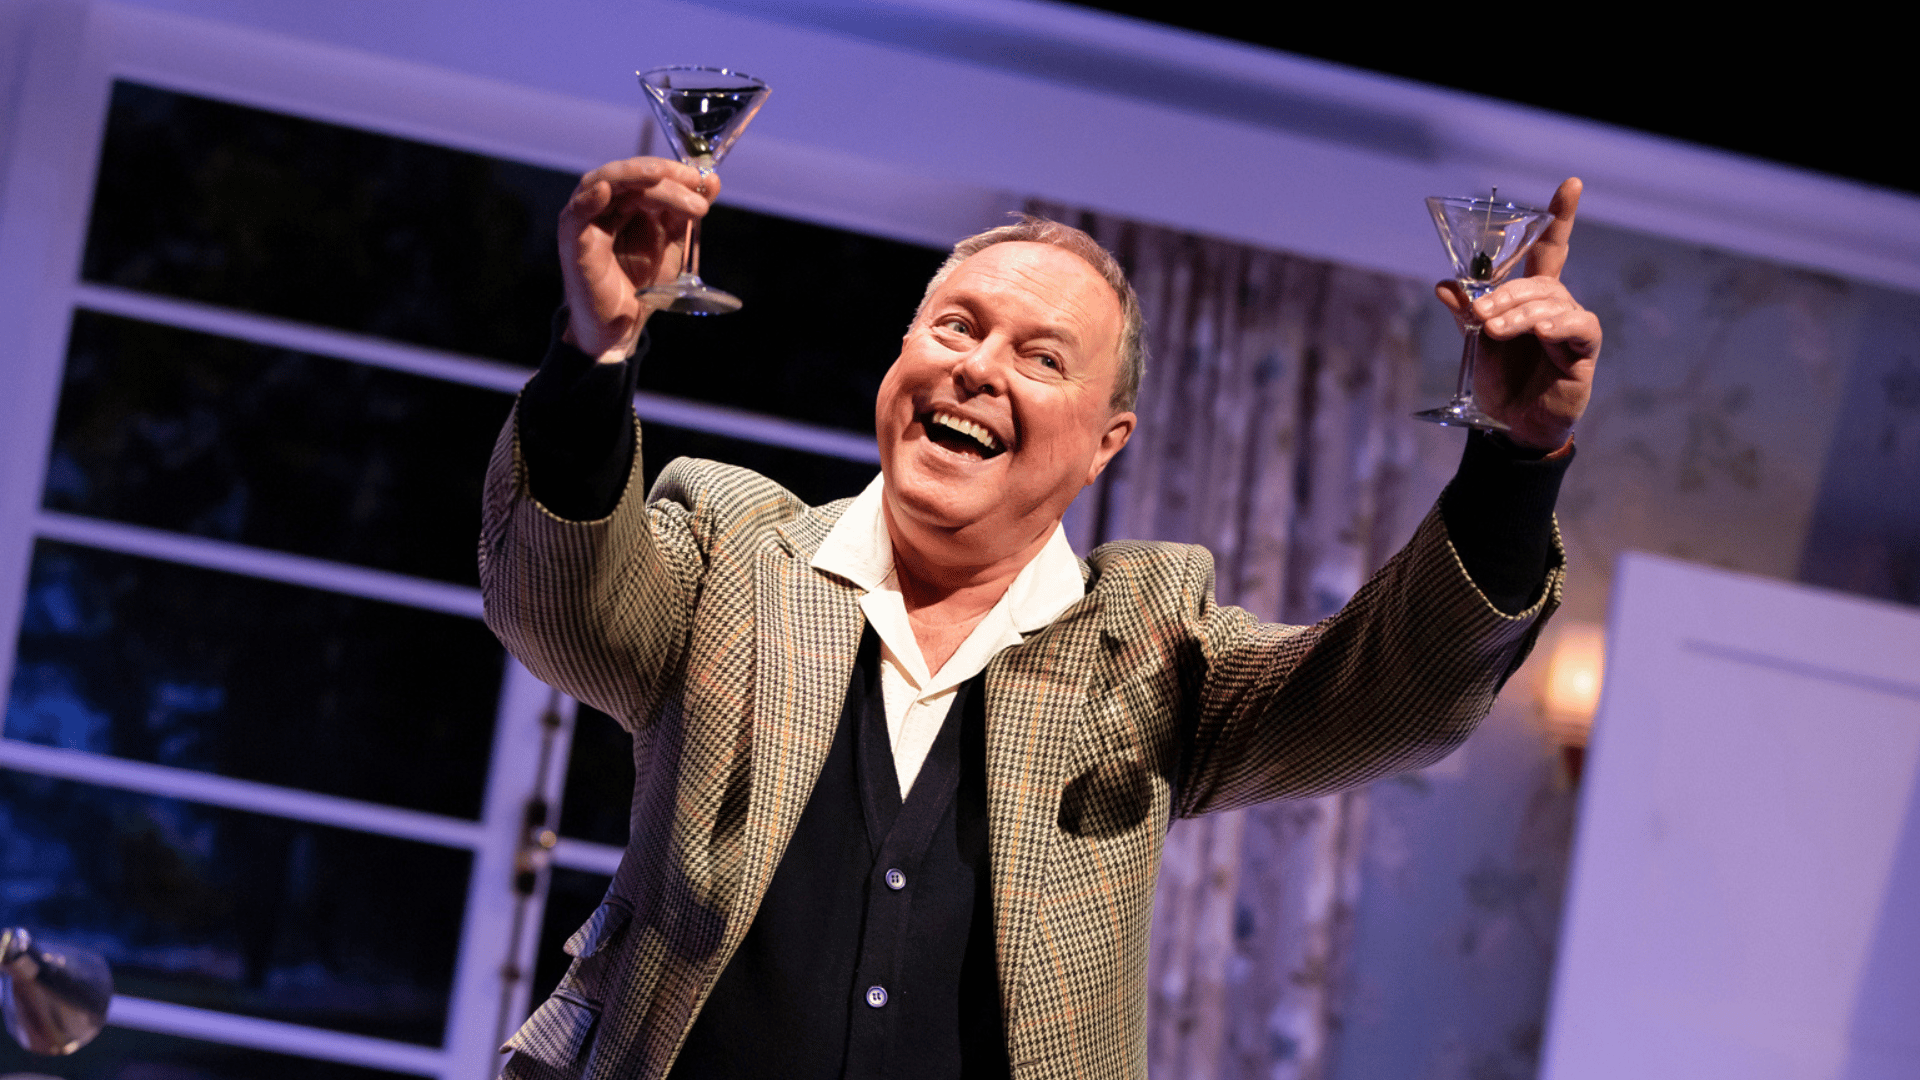 Robert Daws as PG Wodehouse holding two martini glasses on the air with a wide open-mouthed smile on his face. He is wearing a tweed jacket with a white shirt and black waistcoat underneath.